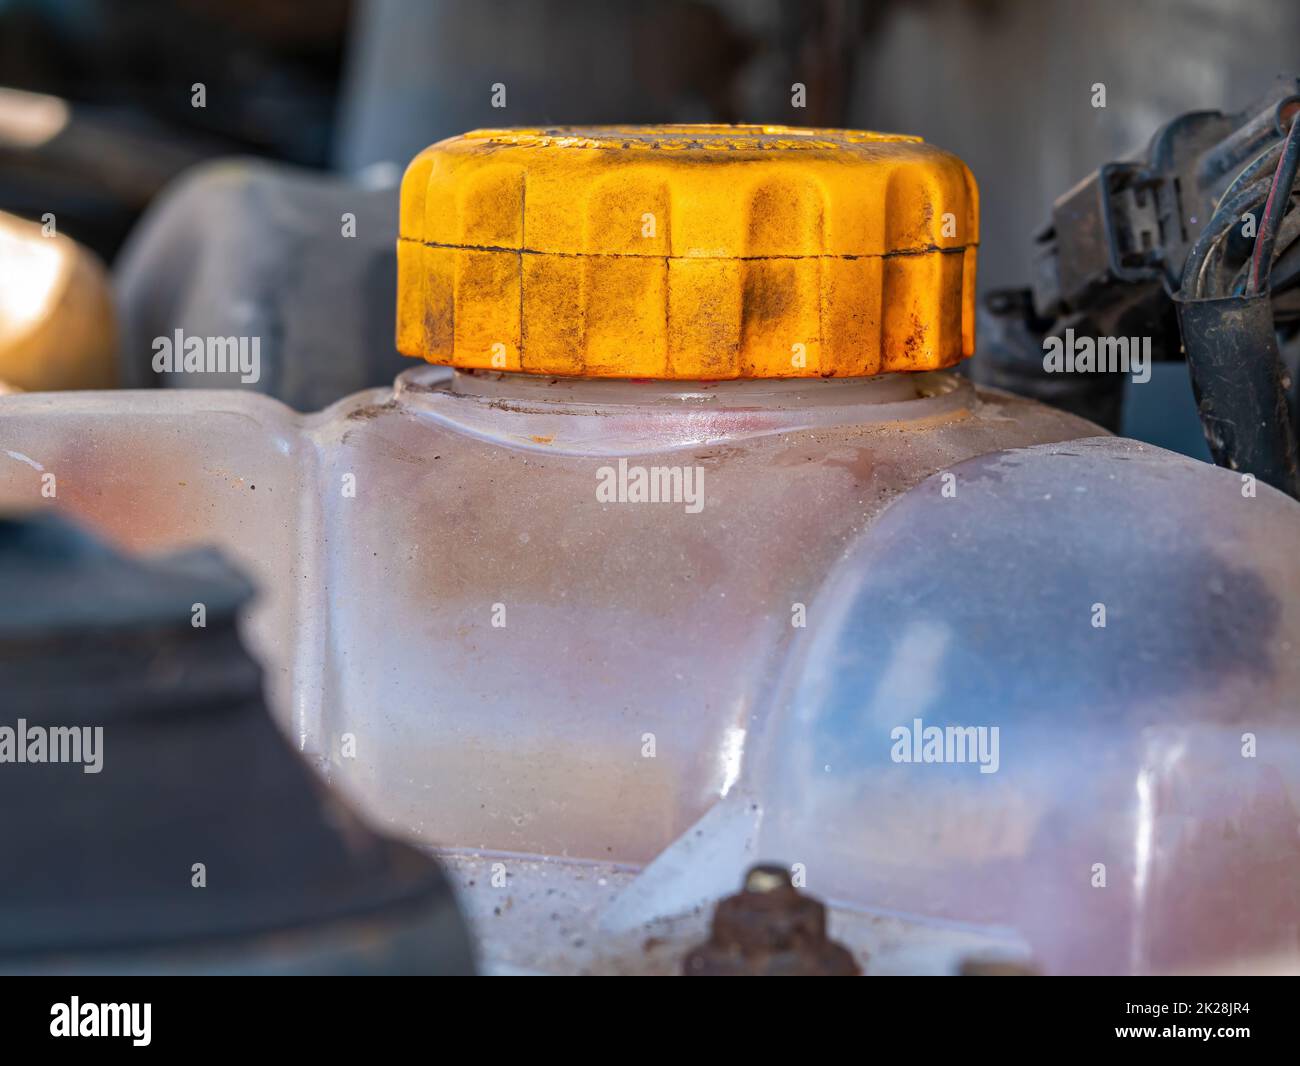 Plastic tank with a yellow cap for antifreeze of the car engine cooling system. Stock Photo